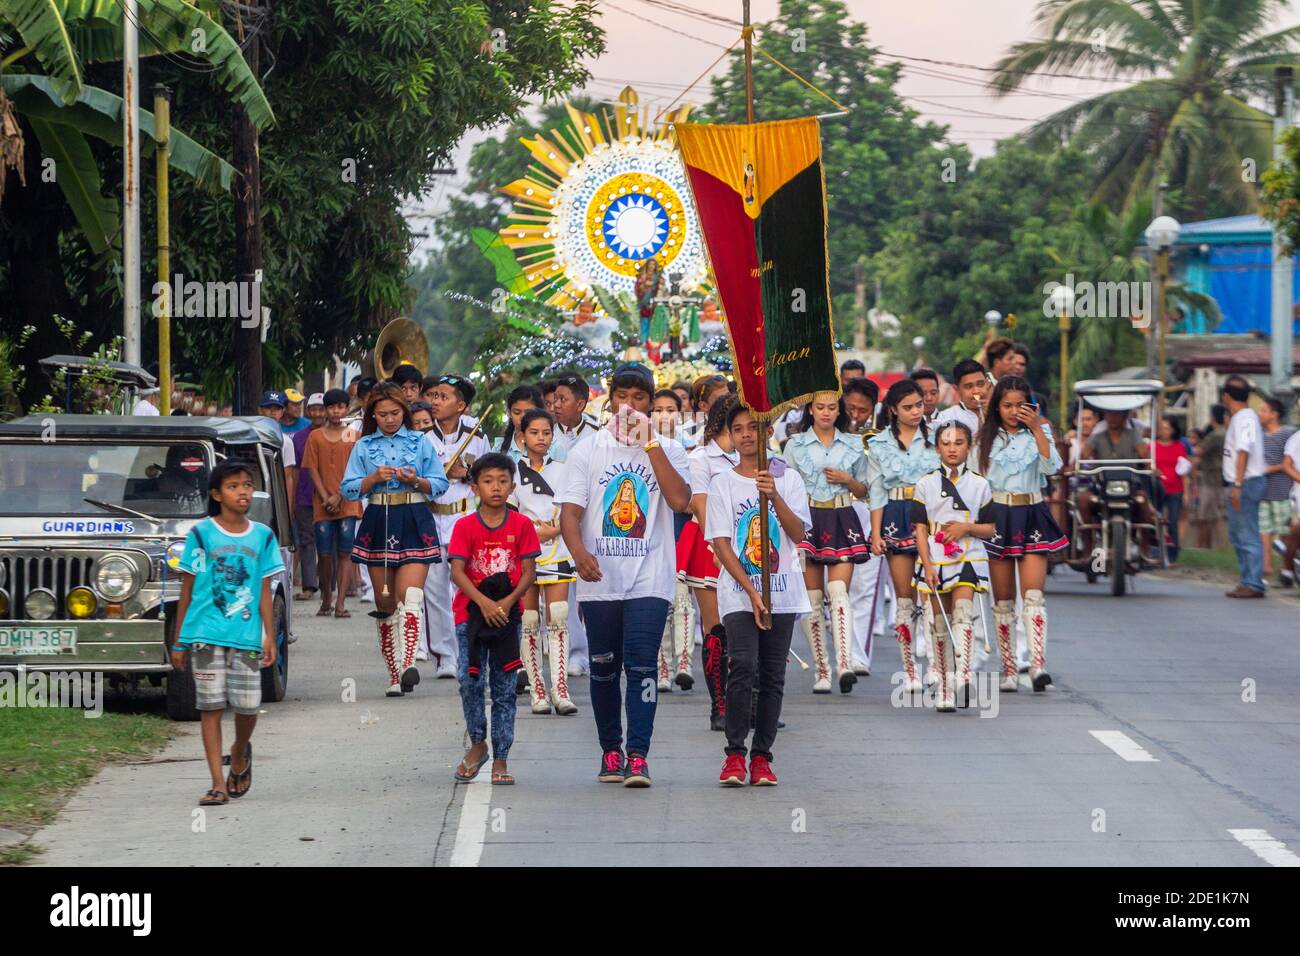 A festival procession with a marching band during the May Flower Tapusan Festival in Alitagtag, Batangas, Philippines Stock Photo